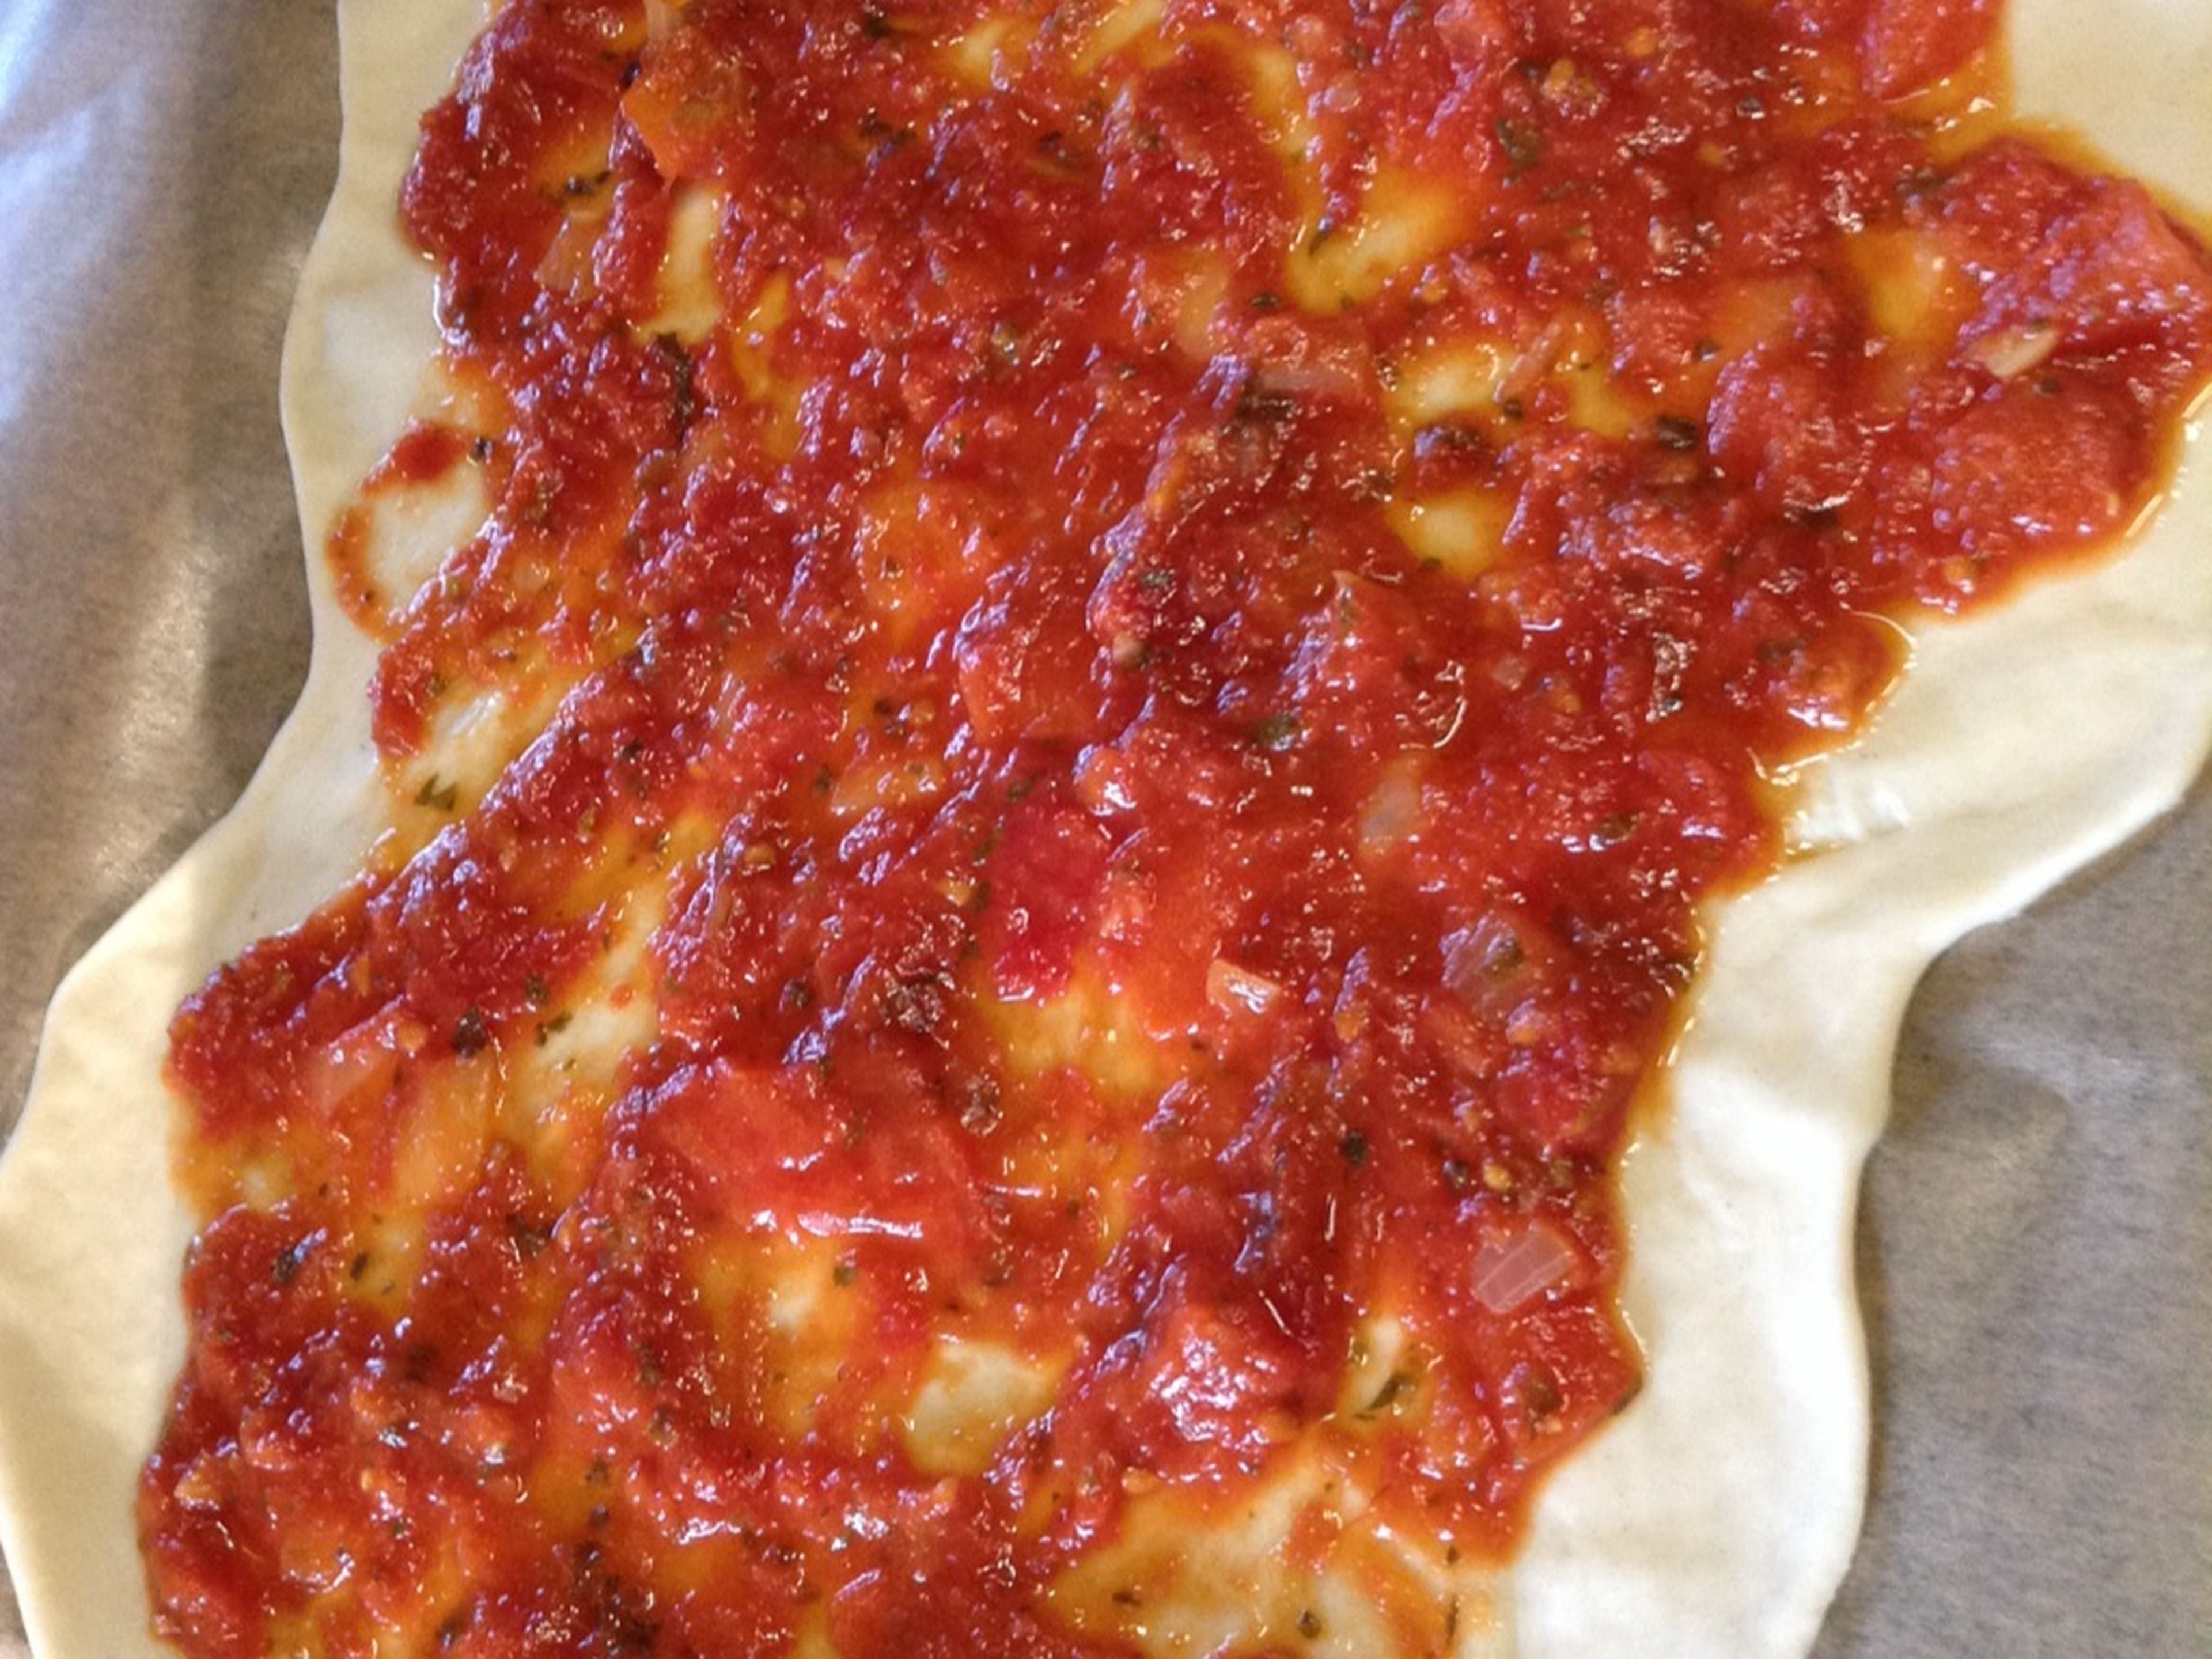 Cover dough with cold pizza sauce, leaving a 2-cm/0.8-in. thick crust. Make sure you don’t apply too much sauce or leave gaps. Use more or less sauce if needed.